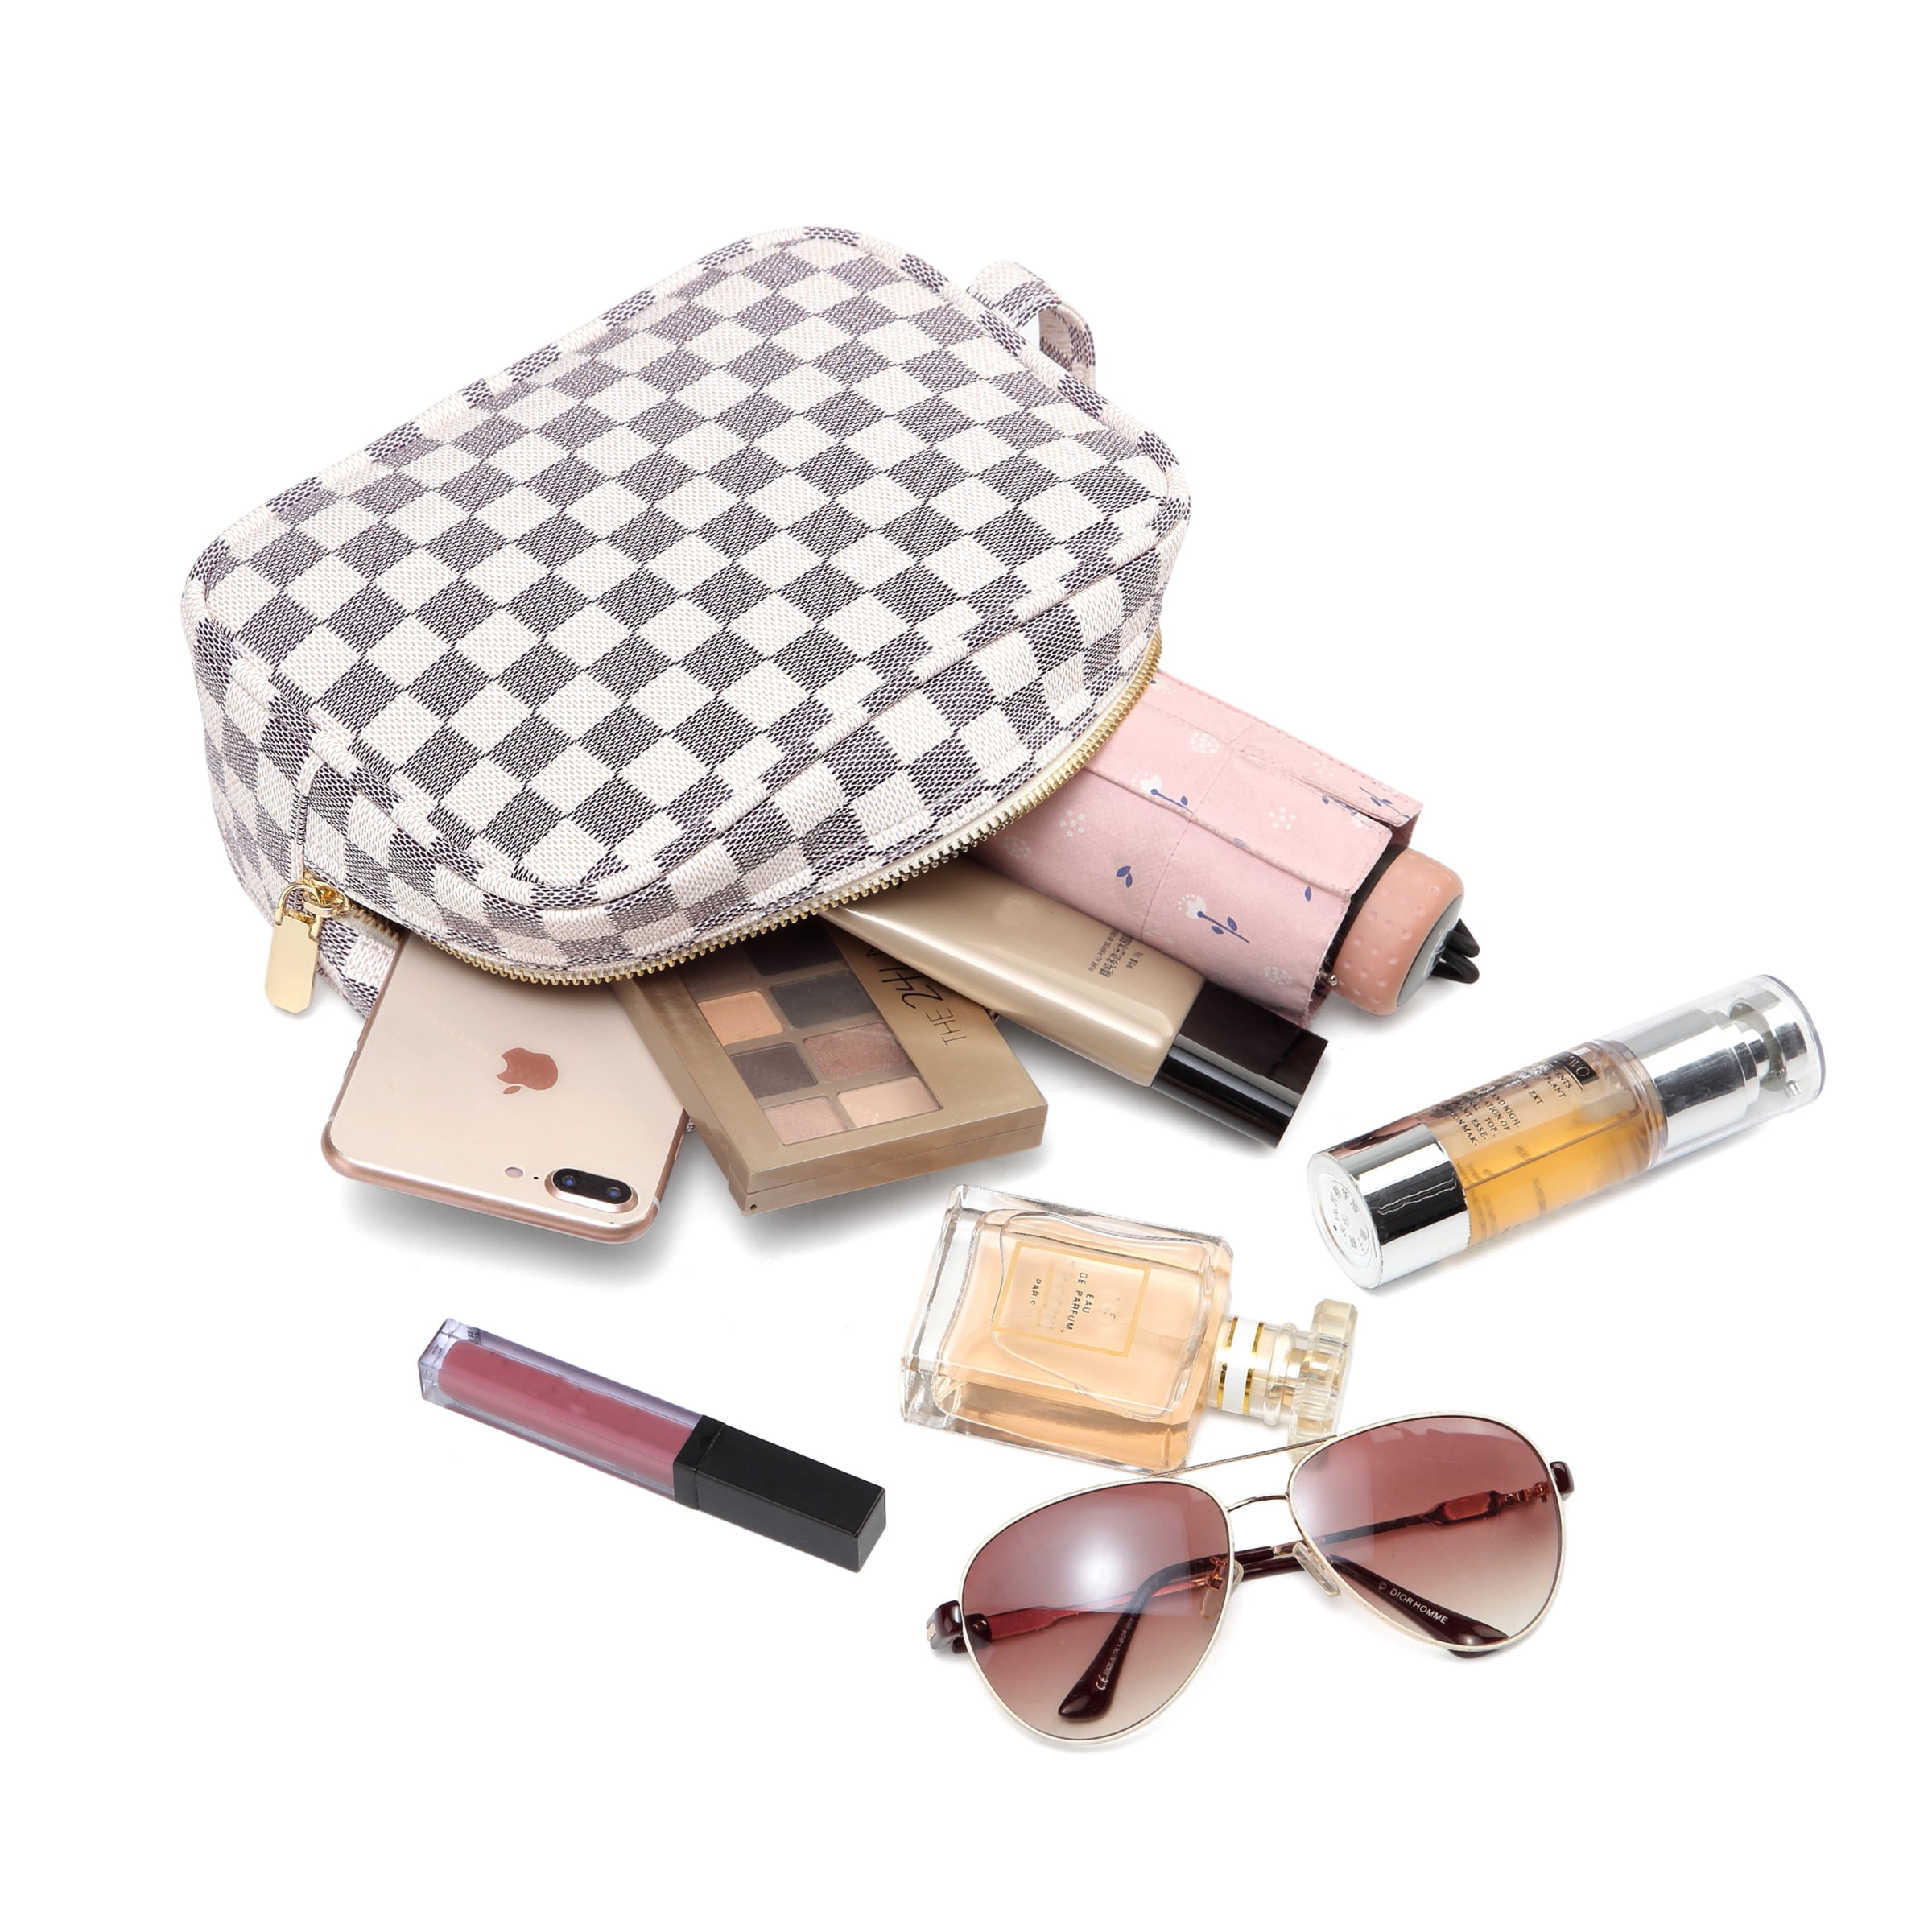 What's in my bag? Daisy Rose Cream Checkered Tote & HAUL AT THE